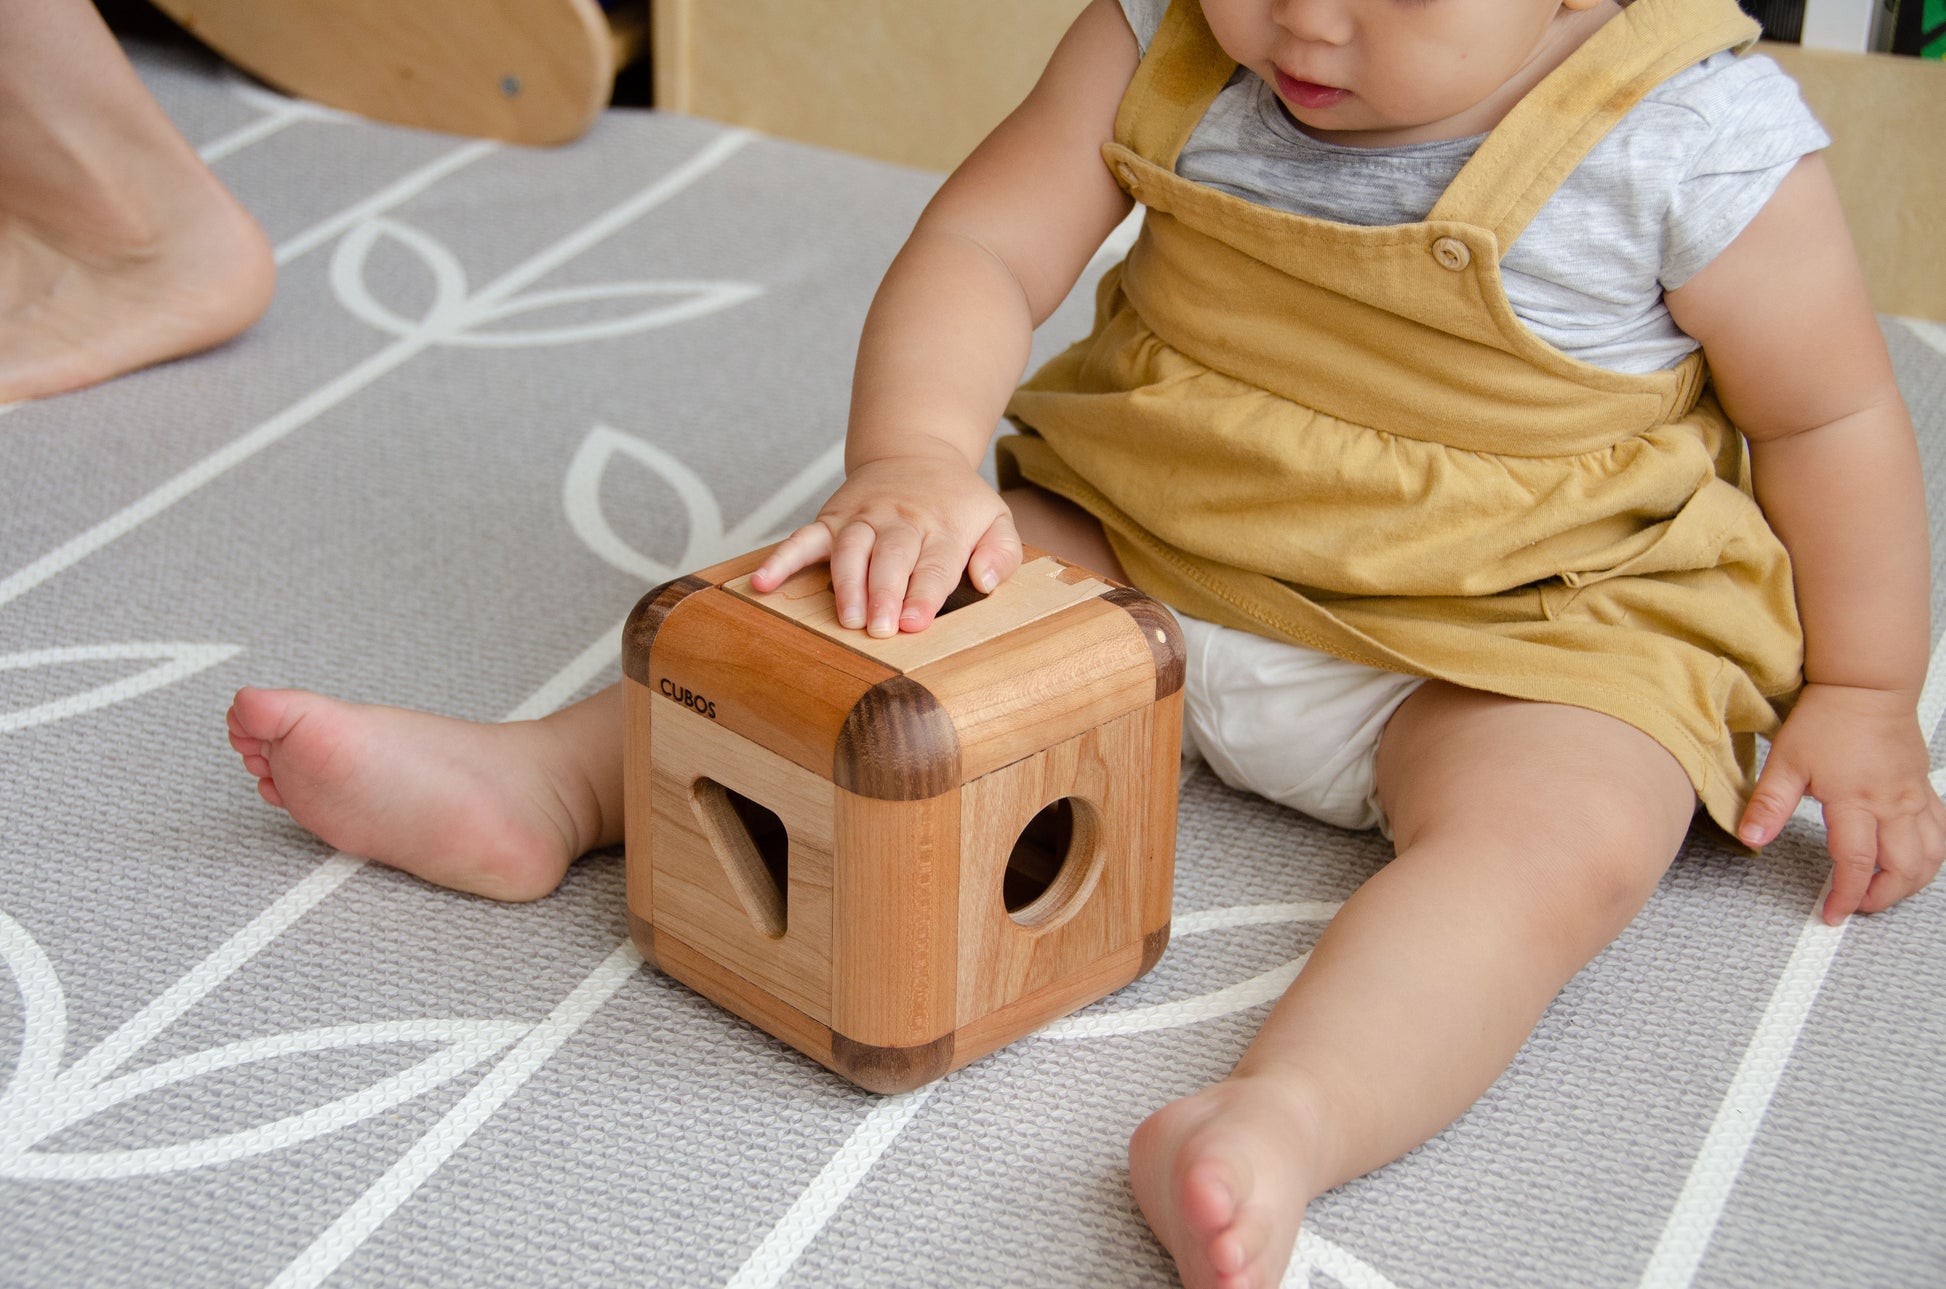 Charming baby girl skillfully inserting the pieces back into the Cubos Lite, demonstrating her growing dexterity and problem-solving abilities, as she enjoys the interactive playtime.